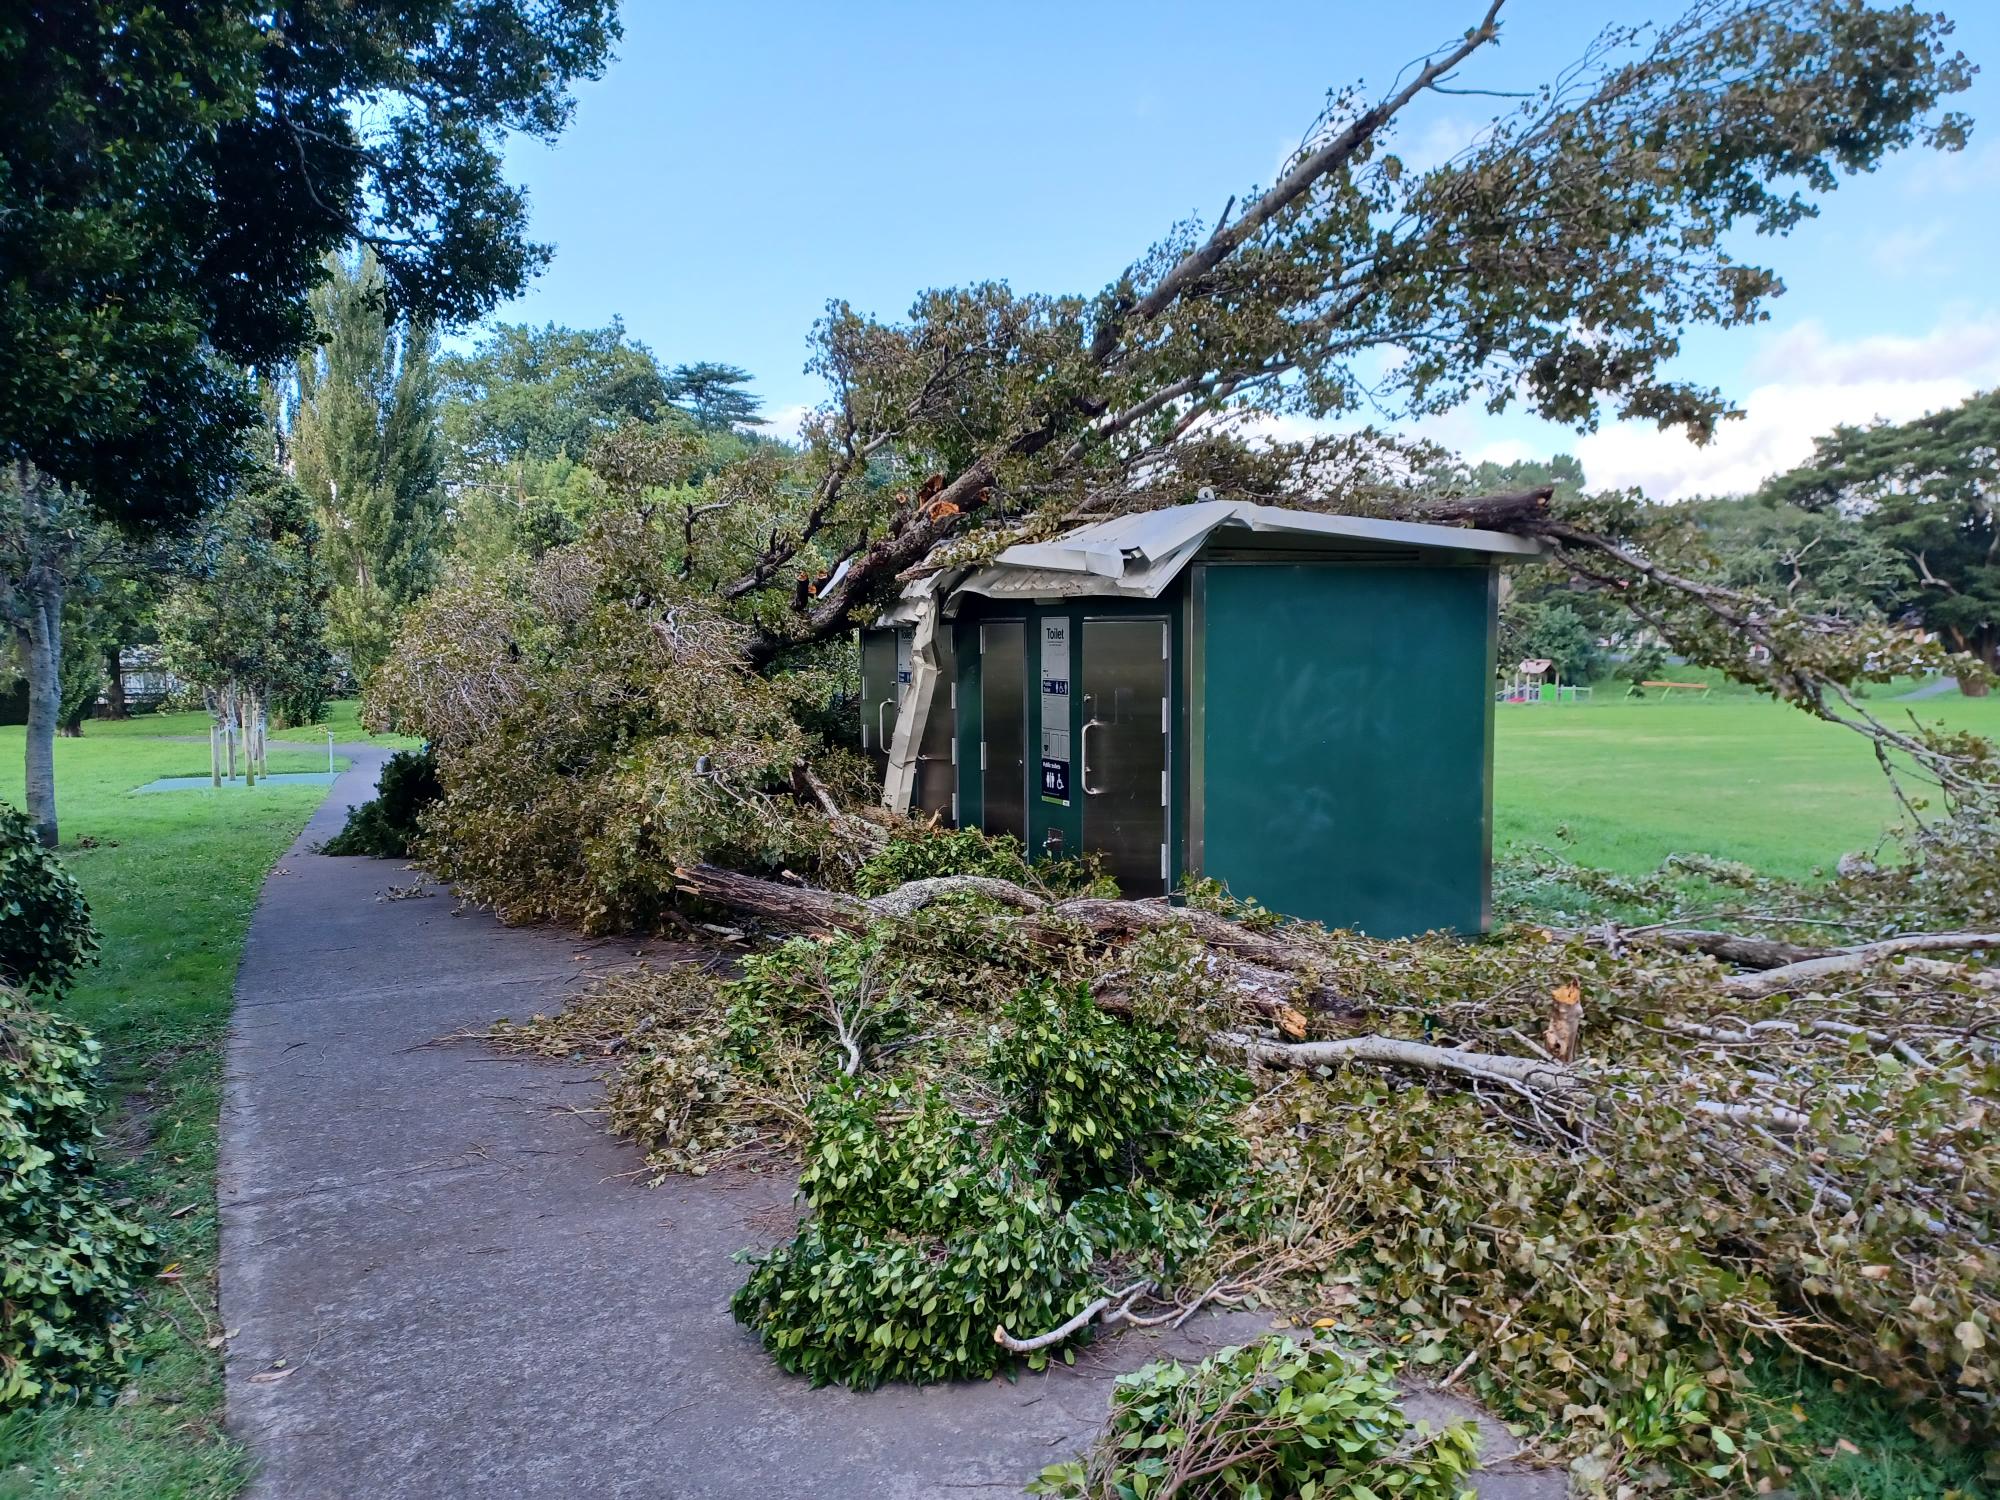 Tree collapses on top of public toilet in Fowlds Park.